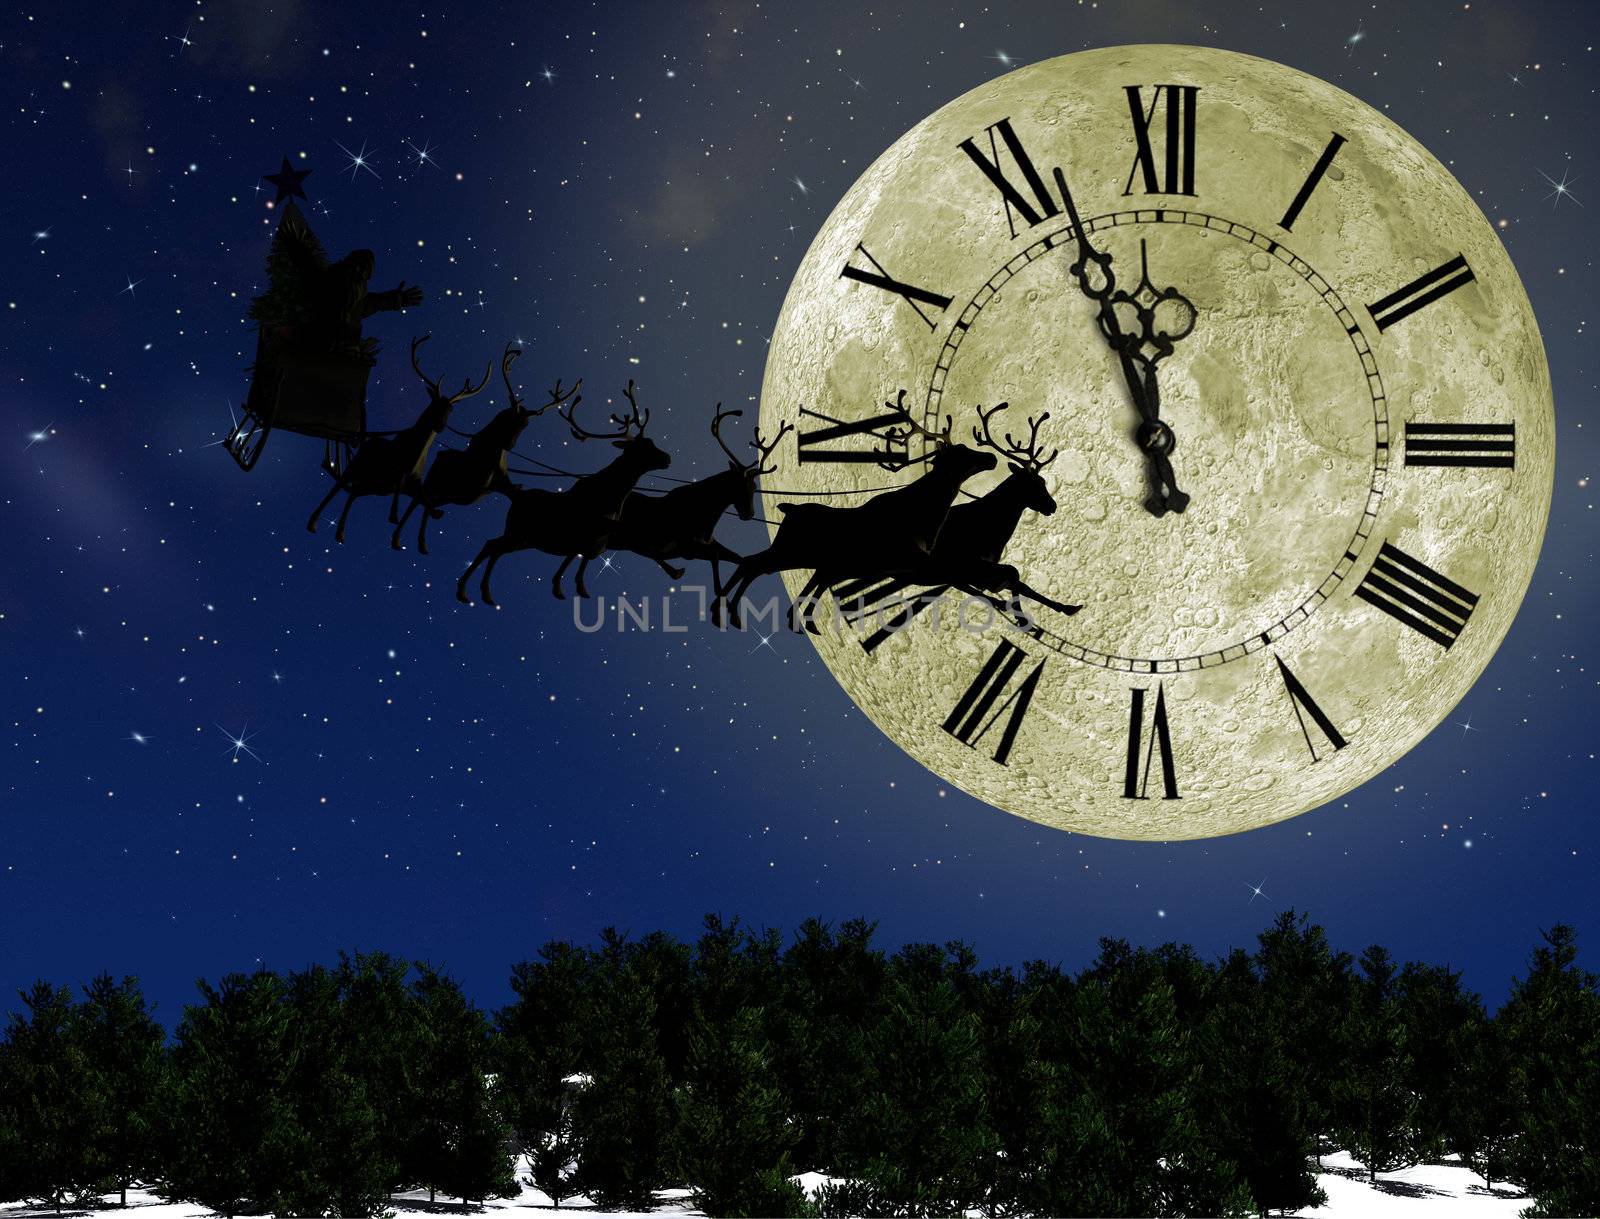 Santa Claus On Sledge With Deer against the bright moon with arrows clock. Concept eve of New year